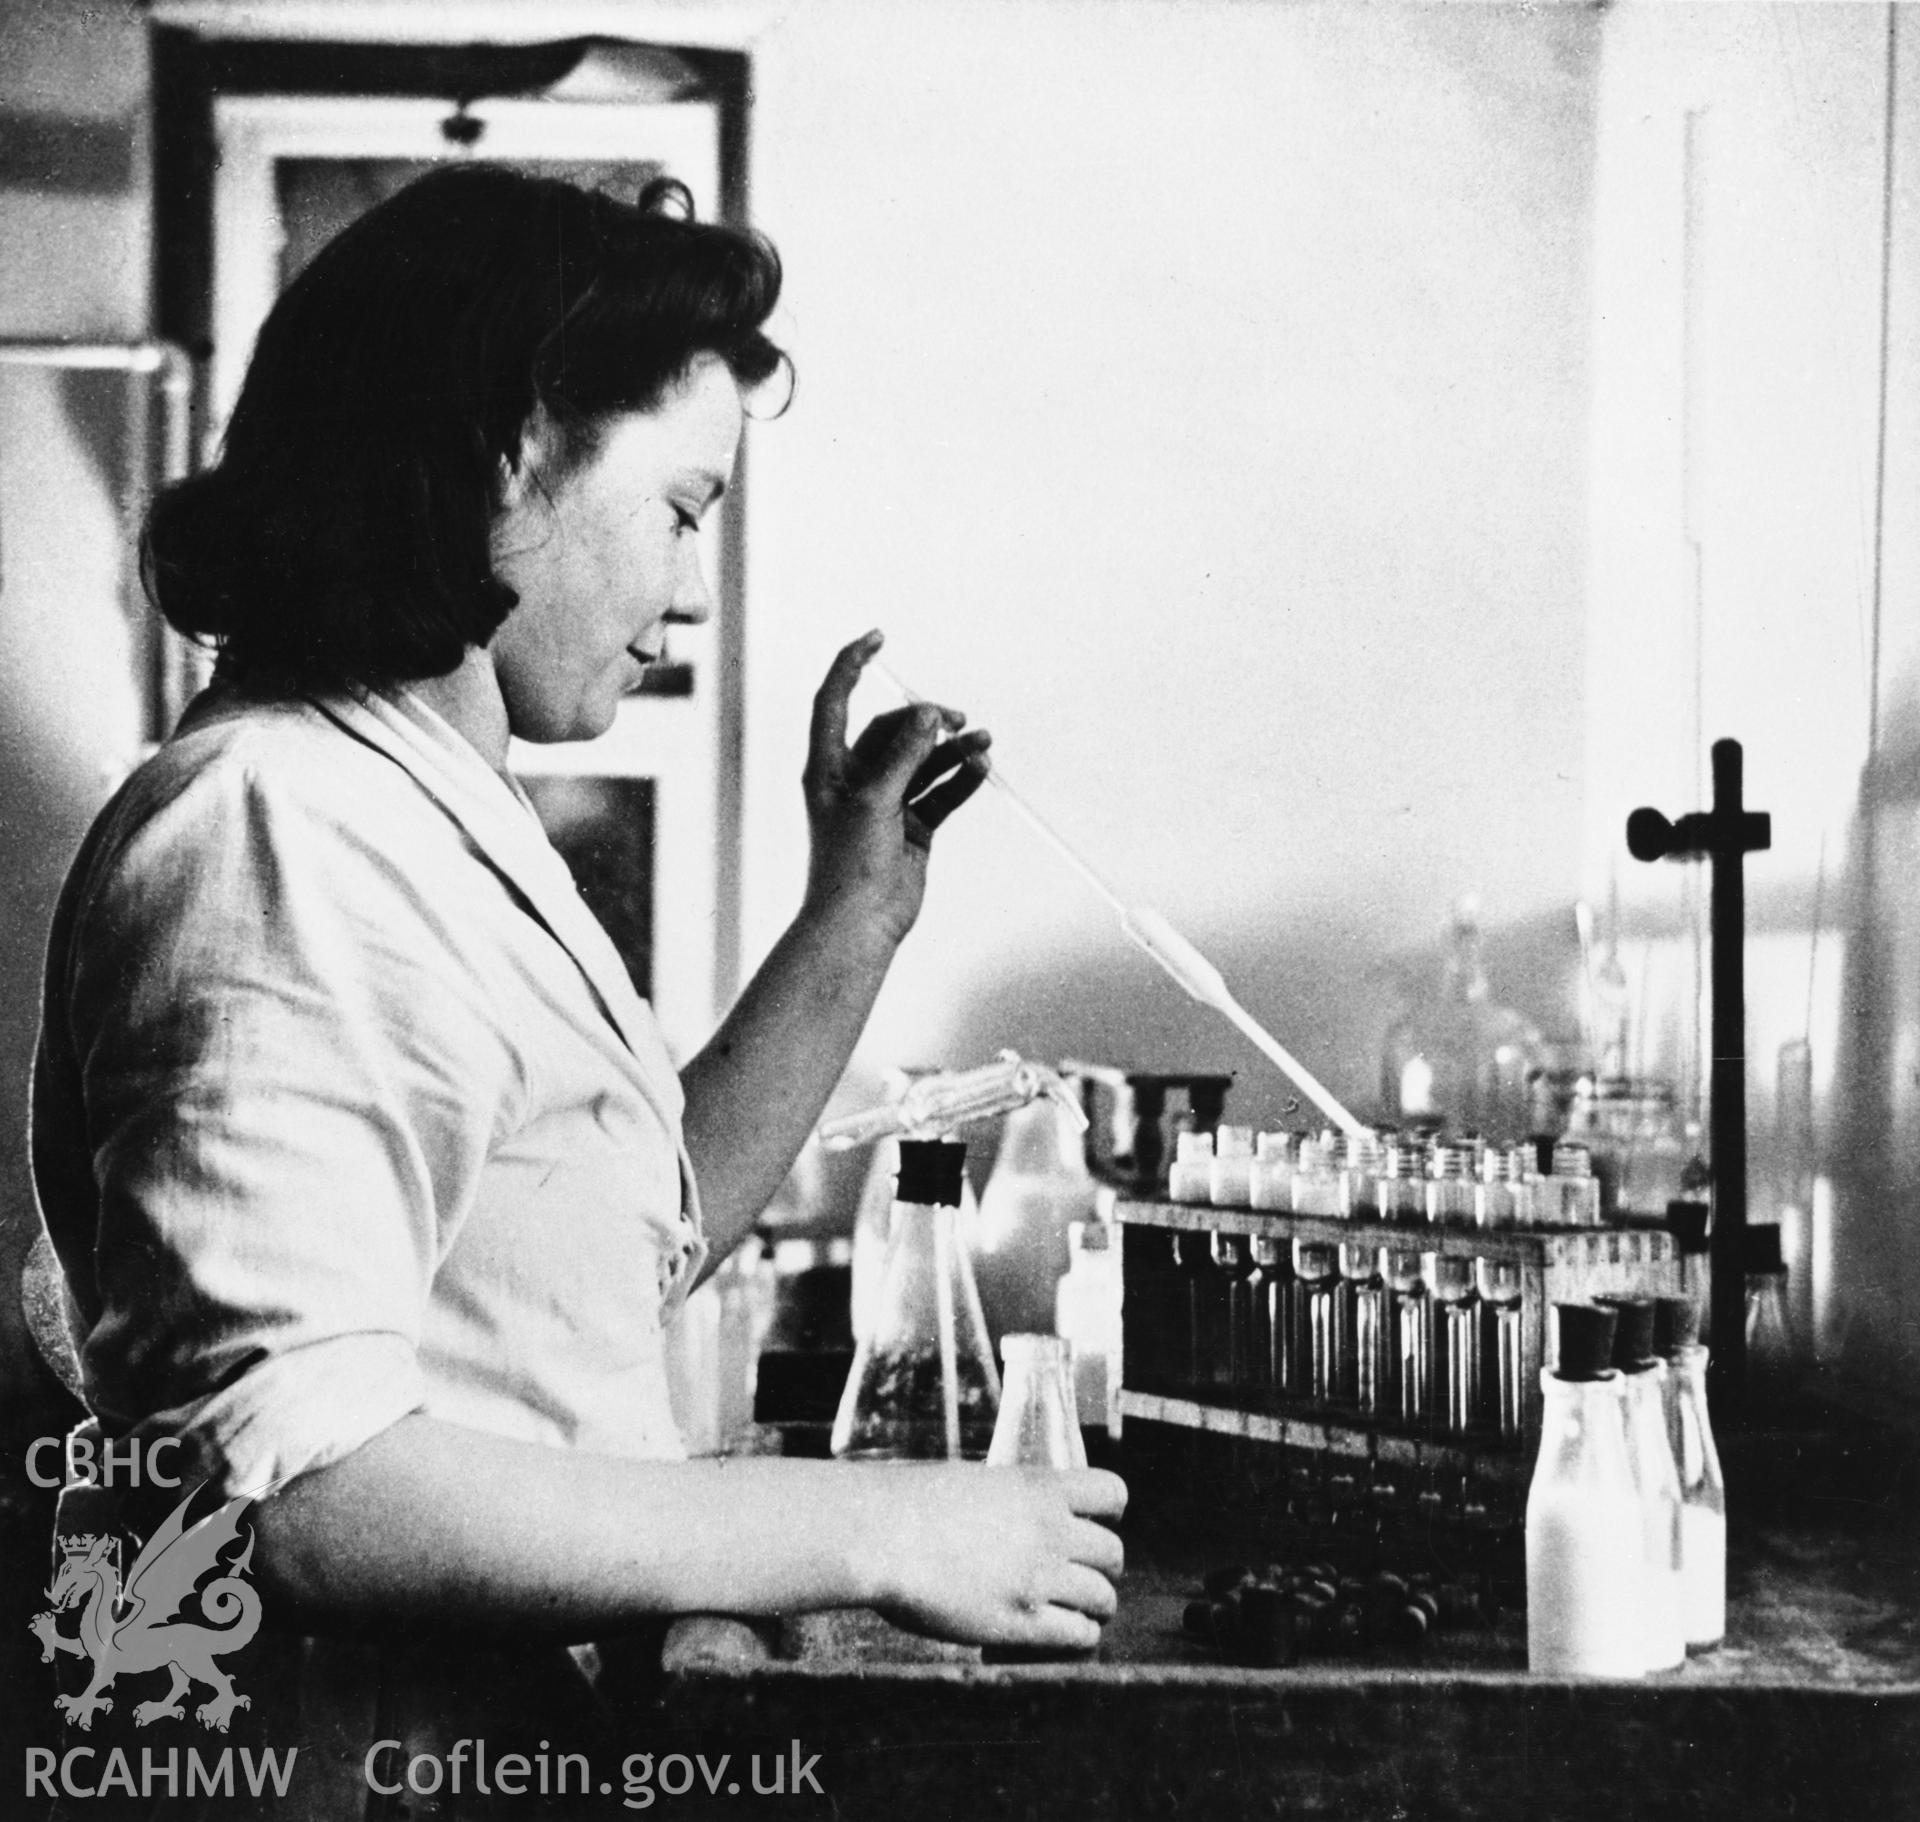 Copy of a pre-1950 photo showing the Gerber method of testing fat content